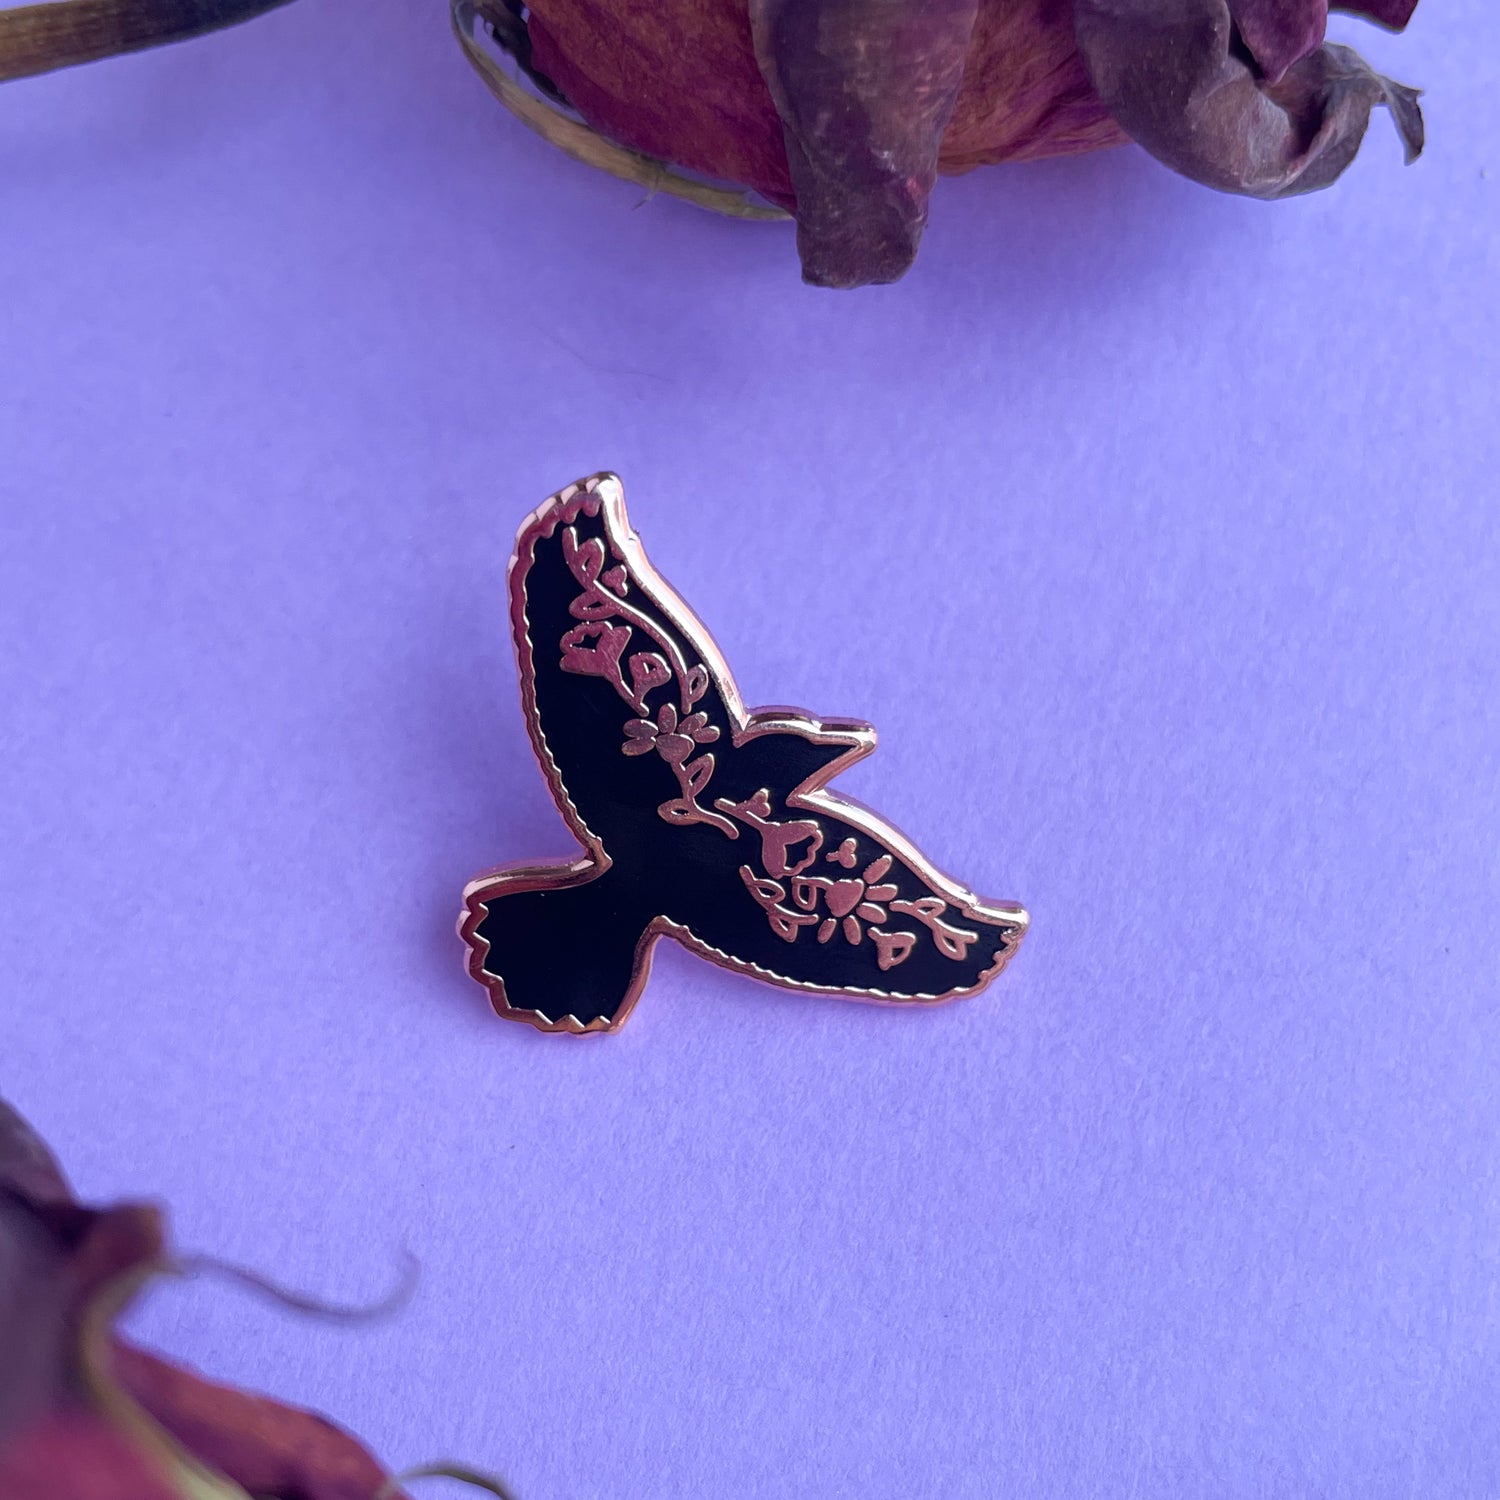 An enamel pin shaped like the silhouette of a raven with a floral pattern along its wings. 